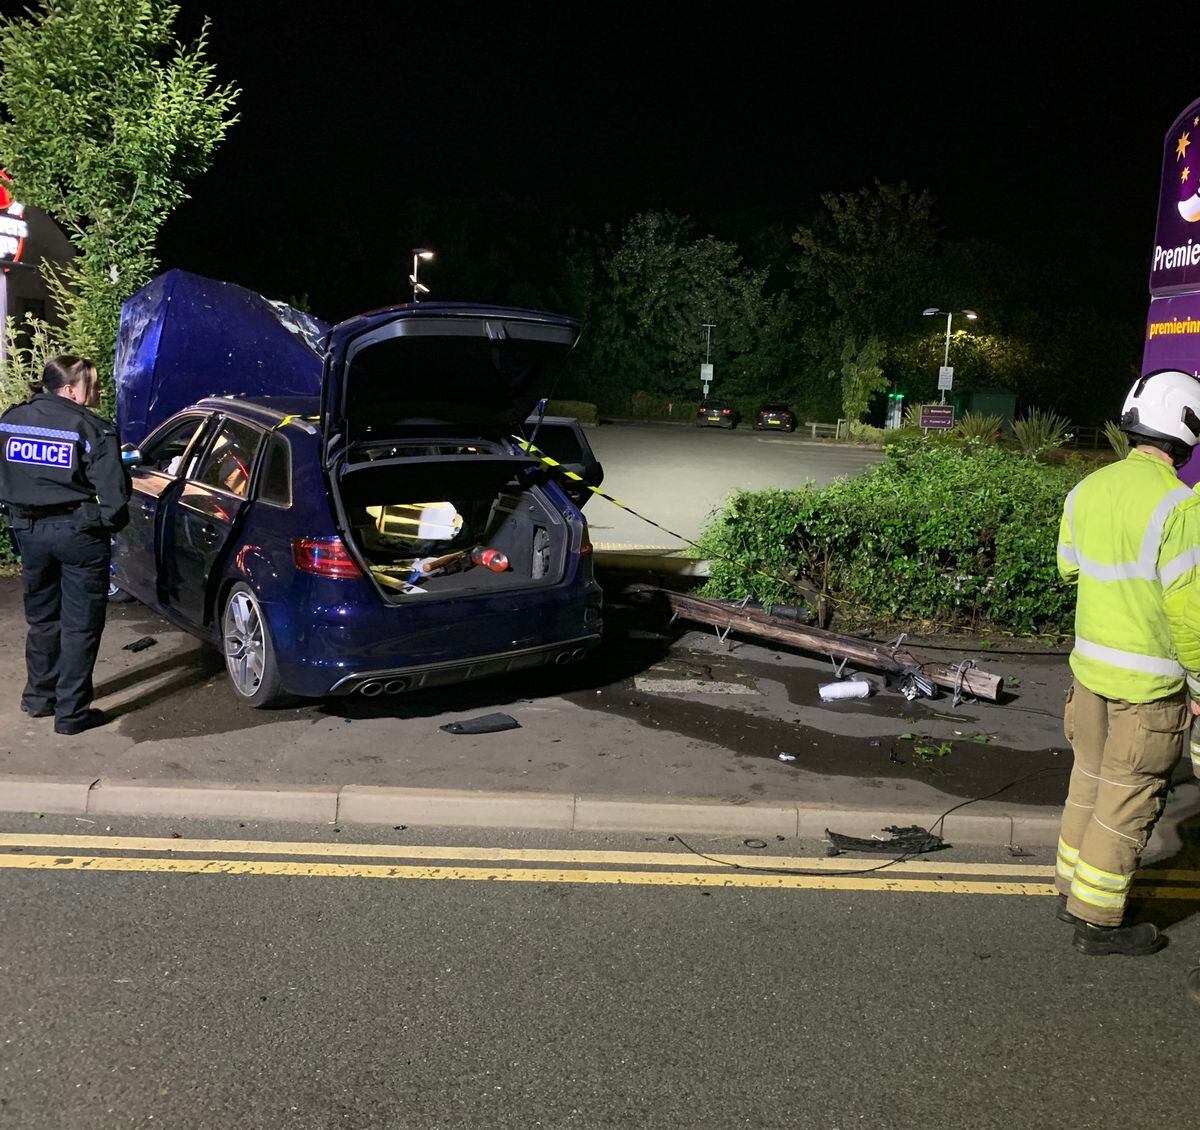 The car crashed into a lamppost and telegraph pole before stopping in a hedge. Photo: @WMFSStourbridge